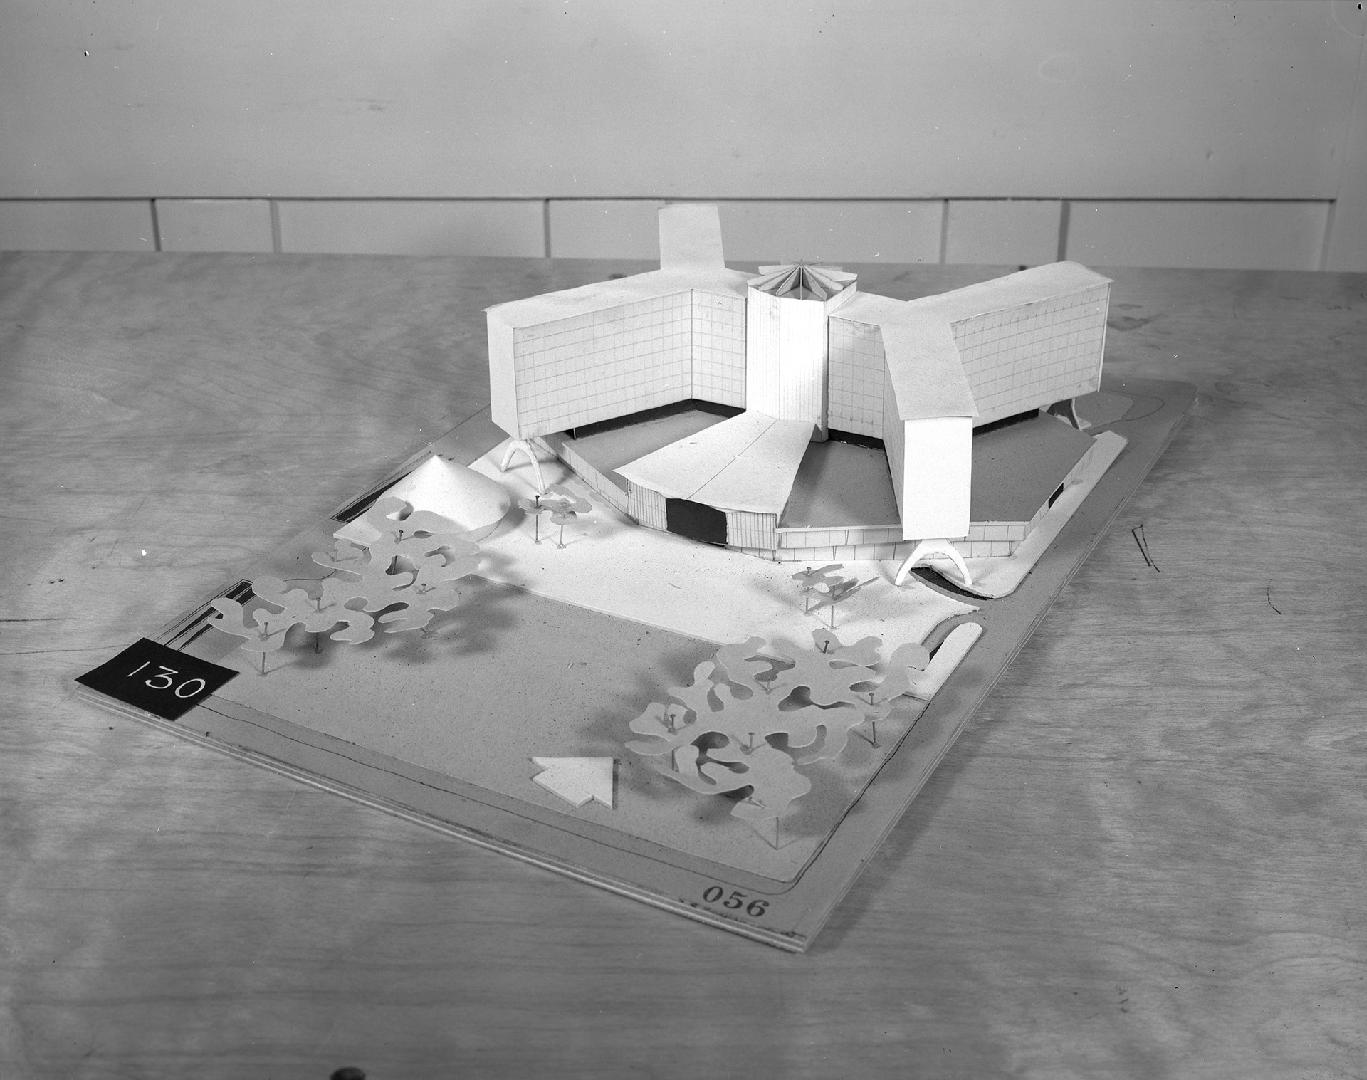 Imre Rosza entry, City Hall and Square Competition, Toronto, 1958, architectural model